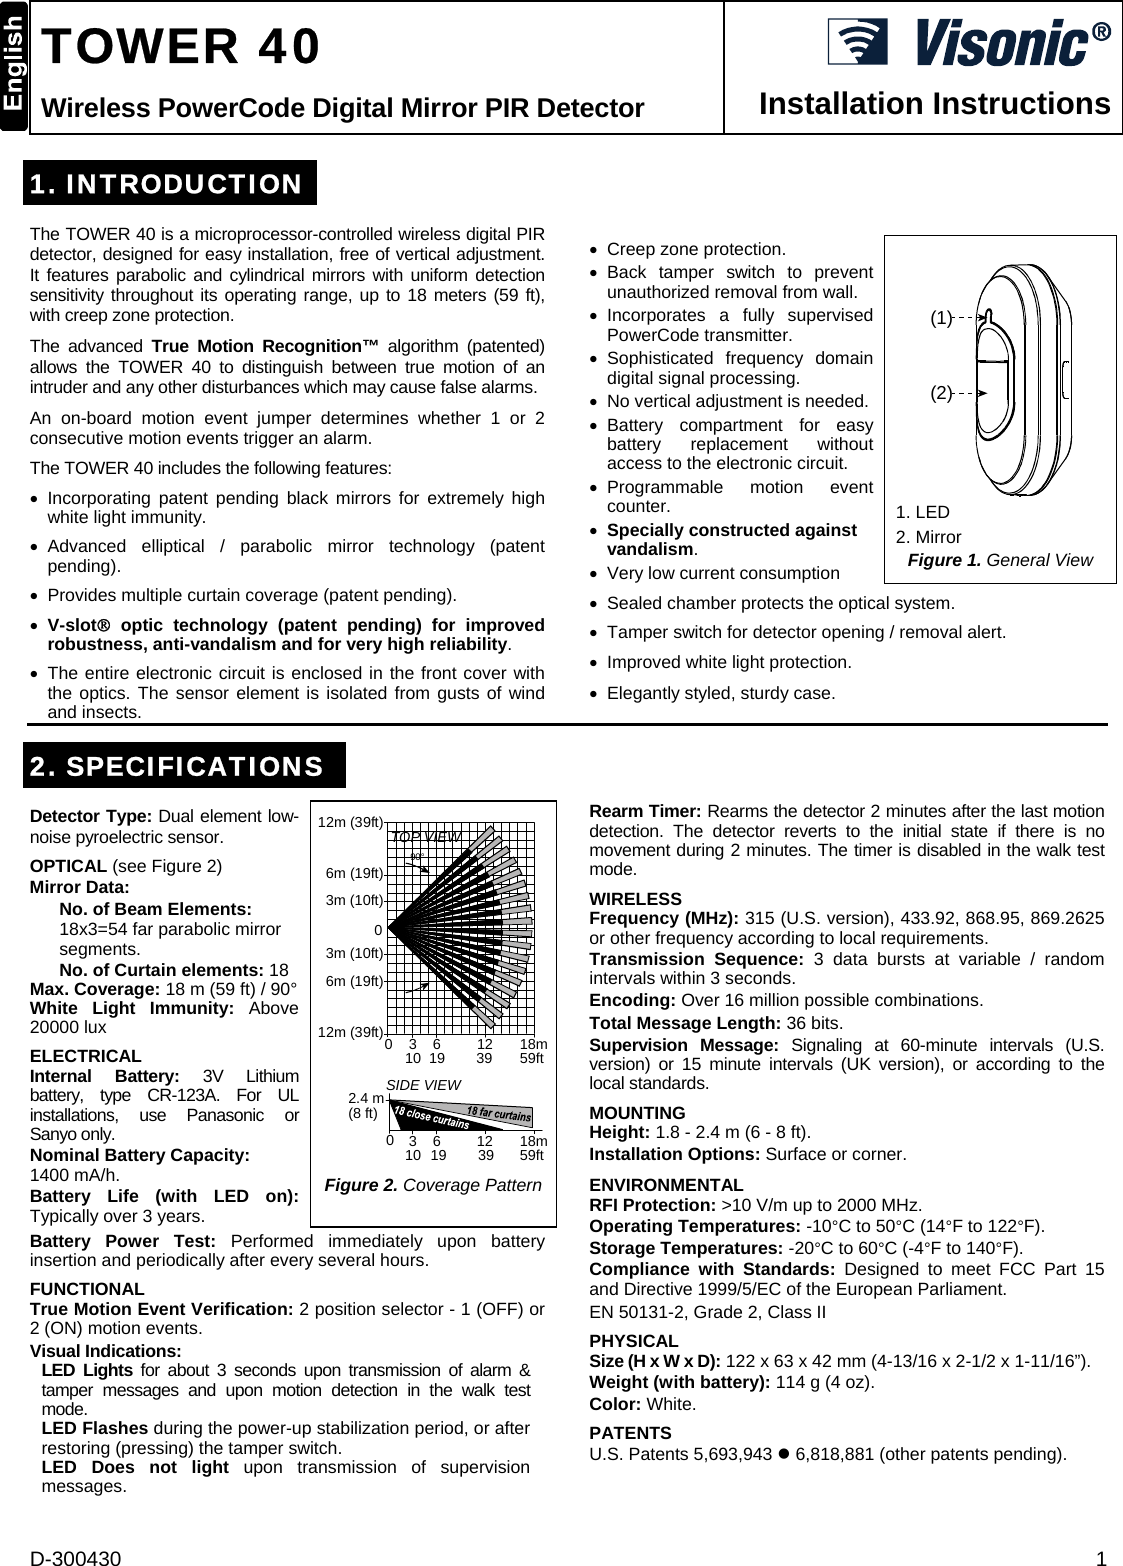 D-300430  1  TOWER 40 Wireless PowerCode Digital Mirror PIR Detector  Installation Instructions 1. INTRODUCTIONThe TOWER 40 is a microprocessor-controlled wireless digital PIR detector, designed for easy installation, free of vertical adjustment. It features parabolic and cylindrical mirrors with uniform detection sensitivity throughout its operating range, up to 18 meters (59 ft), with creep zone protection.  The advanced True Motion Recognition™ algorithm (patented) allows the TOWER 40 to distinguish between true motion of an intruder and any other disturbances which may cause false alarms. An on-board motion event jumper determines whether 1 or 2 consecutive motion events trigger an alarm. The TOWER 40 includes the following features: • Incorporating patent pending black mirrors for extremely high white light immunity. • Advanced elliptical / parabolic mirror technology (patent pending). •  Provides multiple curtain coverage (patent pending). • V-slot® optic technology (patent pending) for improved robustness, anti-vandalism and for very high reliability. •  The entire electronic circuit is enclosed in the front cover with the optics. The sensor element is isolated from gusts of wind and insects.  •  Creep zone protection. • Back tamper switch to prevent unauthorized removal from wall.  • Incorporates a fully supervised PowerCode transmitter. • Sophisticated frequency domain digital signal processing. •  No vertical adjustment is needed. • Battery compartment for easy battery replacement without access to the electronic circuit. • Programmable  motion  event counter. • Specially constructed against vandalism. •  Very low current consumption  (1)(2) 1. LED 2. Mirror Figure 1. General View •  Sealed chamber protects the optical system. •  Tamper switch for detector opening / removal alert. •  Improved white light protection. •  Elegantly styled, sturdy case. 2. SPECIFICATIONS Detector Type: Dual element low-noise pyroelectric sensor. OPTICAL (see Figure 2) Mirror Data: No. of Beam Elements: 18x3=54 far parabolic mirror segments.  No. of Curtain elements: 18  Max. Coverage: 18 m (59 ft) / 90° White Light Immunity: Above 20000 lux ELECTRICAL Internal Battery: 3V Lithium battery, type CR-123A. For UL installations, use Panasonic or Sanyo only. Nominal Battery Capacity:  1400 mA/h. Battery Life (with LED on): Typically over 3 years. 12m (39ft) TOP VIEW90°3 6 18m010 19 39 59ft1206m (19ft)12m (39ft)6m (19ft)0SIDE VIEW2.4 m(8 ft)3 6 18m10 19 39 59ft123m (10ft)3m (10ft) Figure 2. Coverage Pattern Battery Power Test: Performed immediately upon battery insertion and periodically after every several hours. FUNCTIONAL True Motion Event Verification: 2 position selector - 1 (OFF) or 2 (ON) motion events. Visual Indications:  LED Lights for about 3 seconds upon transmission of alarm &amp; tamper messages and upon motion detection in the walk test mode.  LED Flashes during the power-up stabilization period, or after restoring (pressing) the tamper switch. LED Does not light upon transmission of supervision messages.  Rearm Timer: Rearms the detector 2 minutes after the last motion detection. The detector reverts to the initial state if there is no movement during 2 minutes. The timer is disabled in the walk test mode. WIRELESS Frequency (MHz): 315 (U.S. version), 433.92, 868.95, 869.2625 or other frequency according to local requirements. Transmission Sequence: 3 data bursts at variable / random intervals within 3 seconds. Encoding: Over 16 million possible combinations. Total Message Length: 36 bits. Supervision Message: Signaling at 60-minute intervals (U.S. version) or 15 minute intervals (UK version), or according to the local standards. MOUNTING  Height: 1.8 - 2.4 m (6 - 8 ft). Installation Options: Surface or corner. ENVIRONMENTAL RFI Protection: &gt;10 V/m up to 2000 MHz. Operating Temperatures: -10°C to 50°C (14°F to 122°F). Storage Temperatures: -20°C to 60°C (-4°F to 140°F). Compliance with Standards: Designed to meet FCC Part 15 and Directive 1999/5/EC of the European Parliament. EN 50131-2, Grade 2, Class II PHYSICAL Size (H x W x D): 122 x 63 x 42 mm (4-13/16 x 2-1/2 x 1-11/16”). Weight (with battery): 114 g (4 oz). Color: White. PATENTS U.S. Patents 5,693,943 z 6,818,881 (other patents pending). 